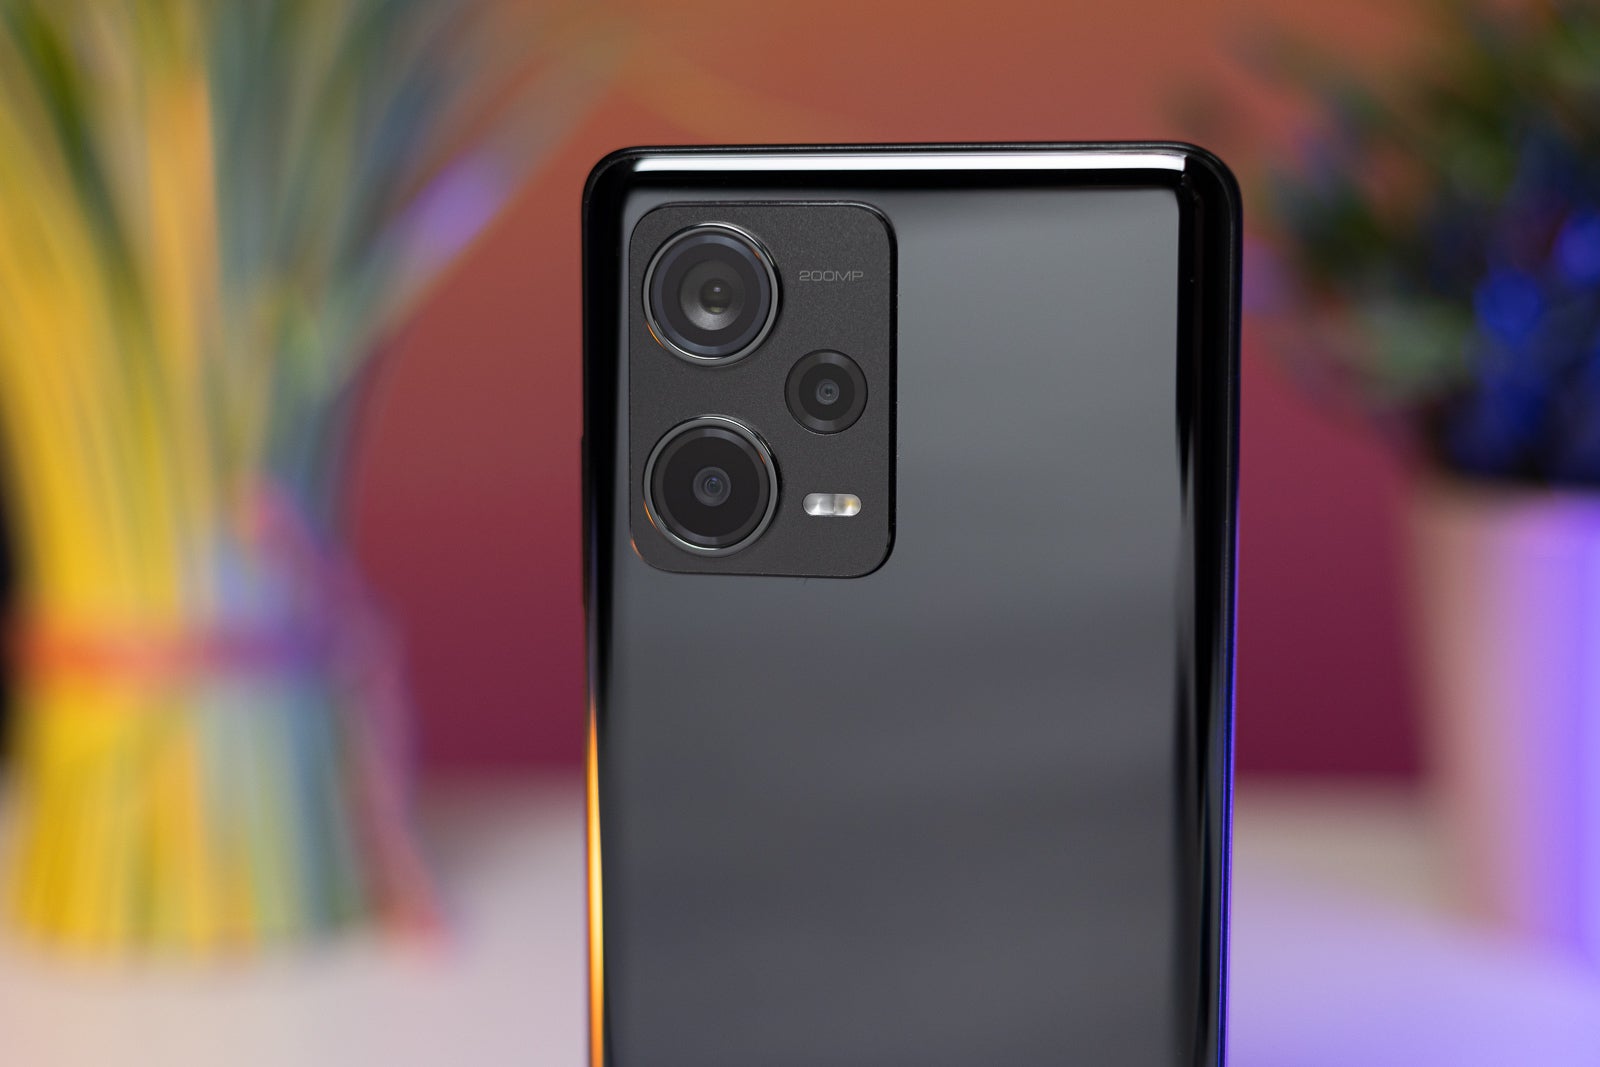 (Image Credit - PhoneArena) The Redmi Note 12 Explorer comes with a 200MP main camera - Insane "Explorer Edition" phone brings 10X faster charging than Galaxy S22 or iPhone 14: we test world’s fastest 210W charging